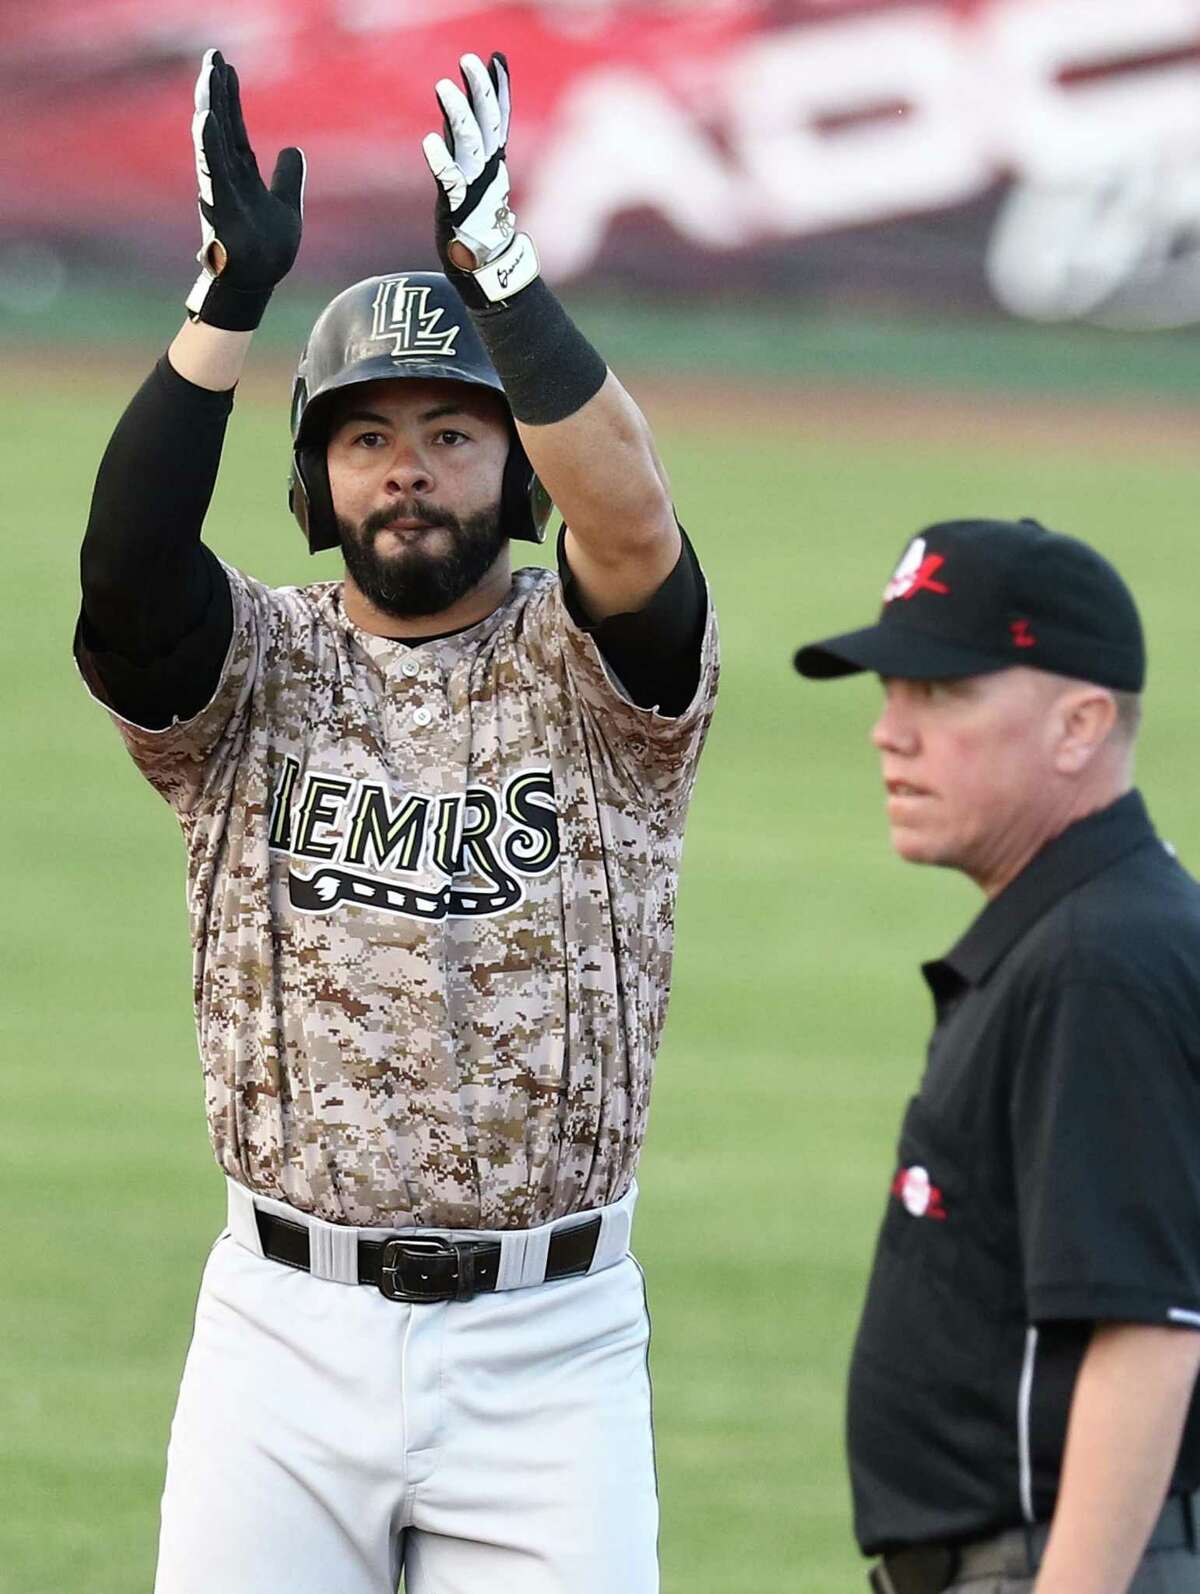 Lemurs infielder Abel Nieves is in his sixth year in the AA and hit .290 last year.